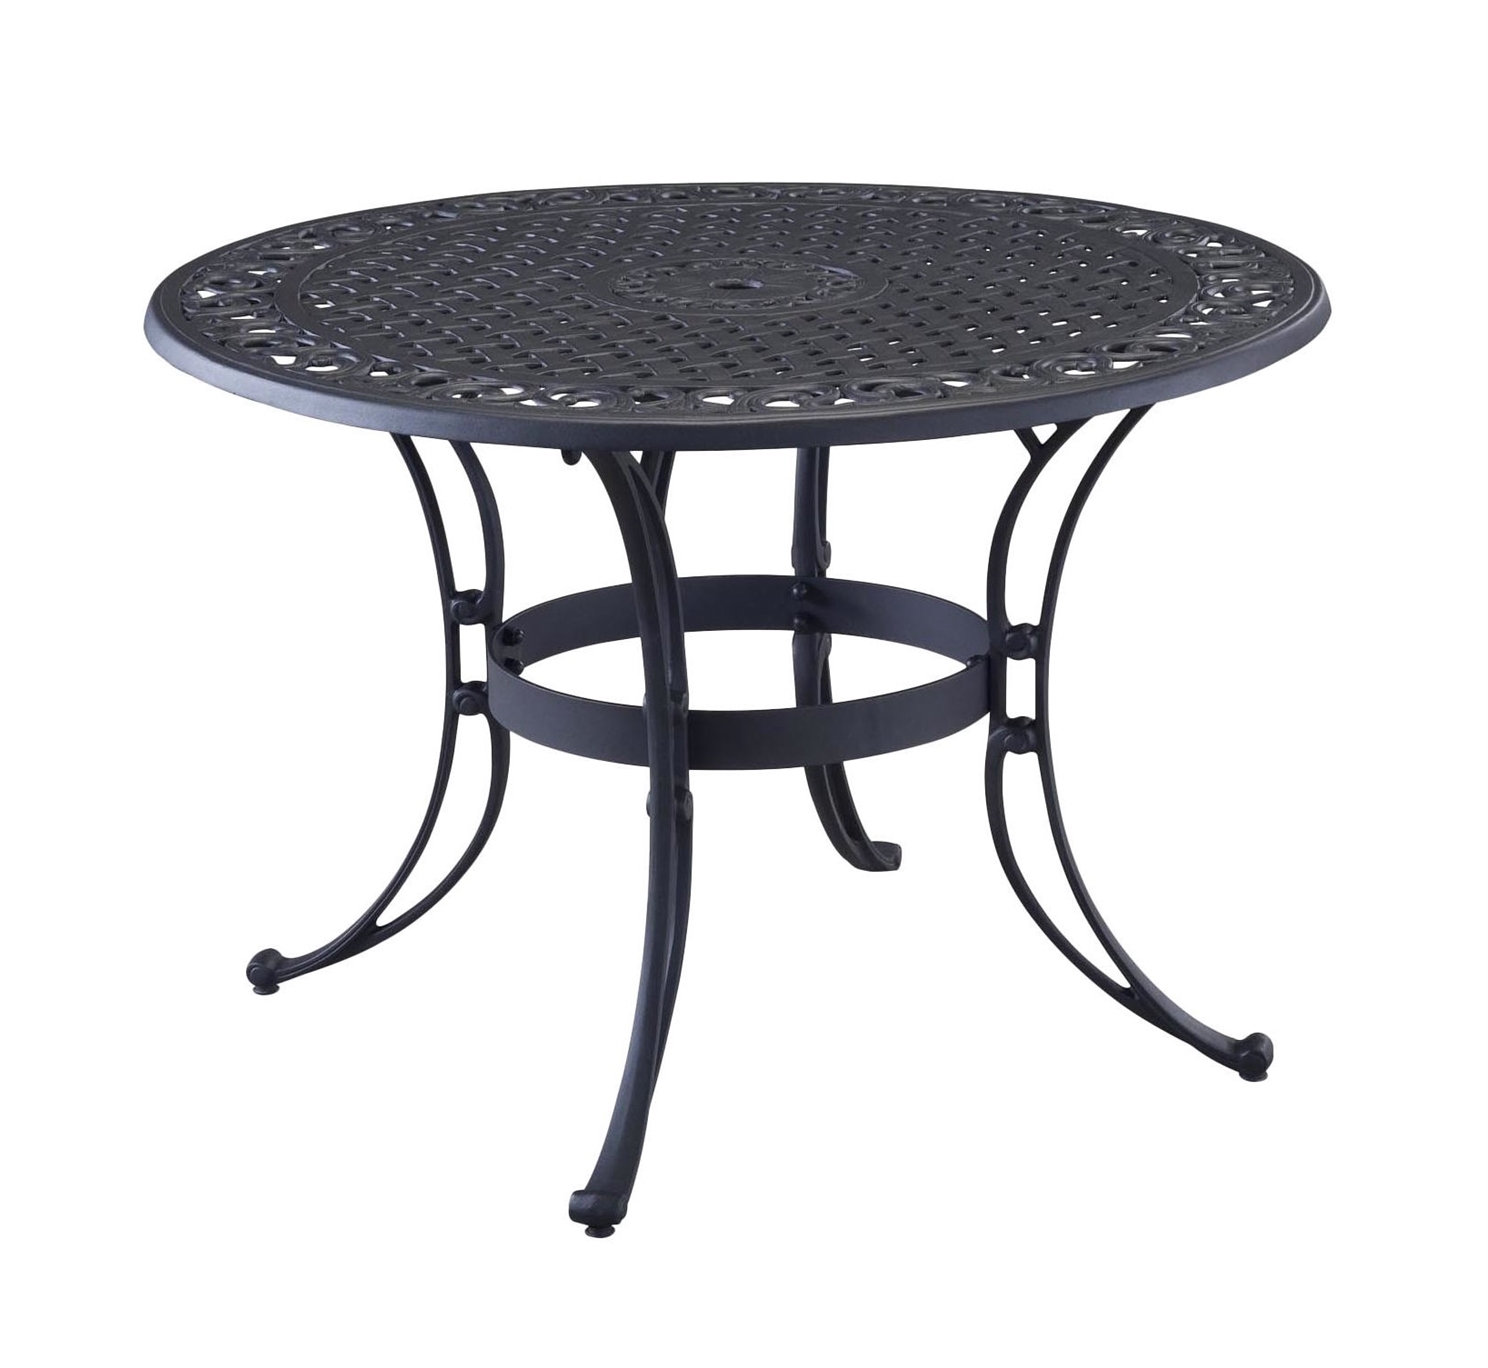 Outdoor Coffee Table With Umbrella Hole Design | Roy Home Design